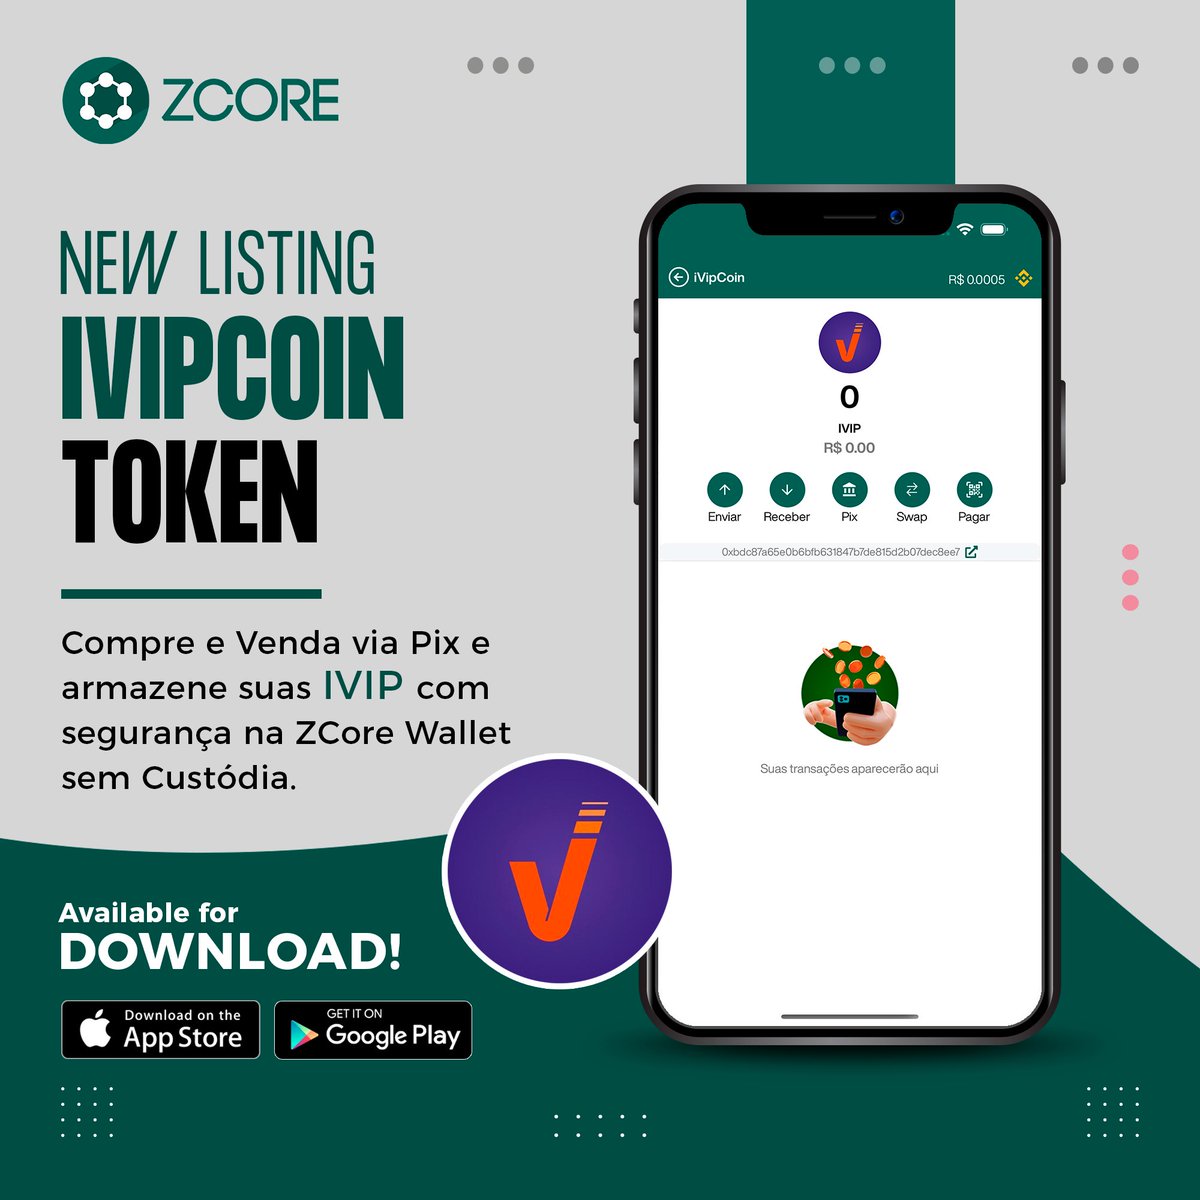 🚀✨ iVipCoin (IVIP) Token is Now Listed on ZCore Wallet, Our Decentralized Wallet! ✨🚀
zcore.network/app

✅🔐 With ZCore Wallet, You Can Securely Swap, Store, Buy, and Sell $IVIP using Pix in a Completely Decentralized Manner! 🔐✅

🔗📲 You can also make purchases using